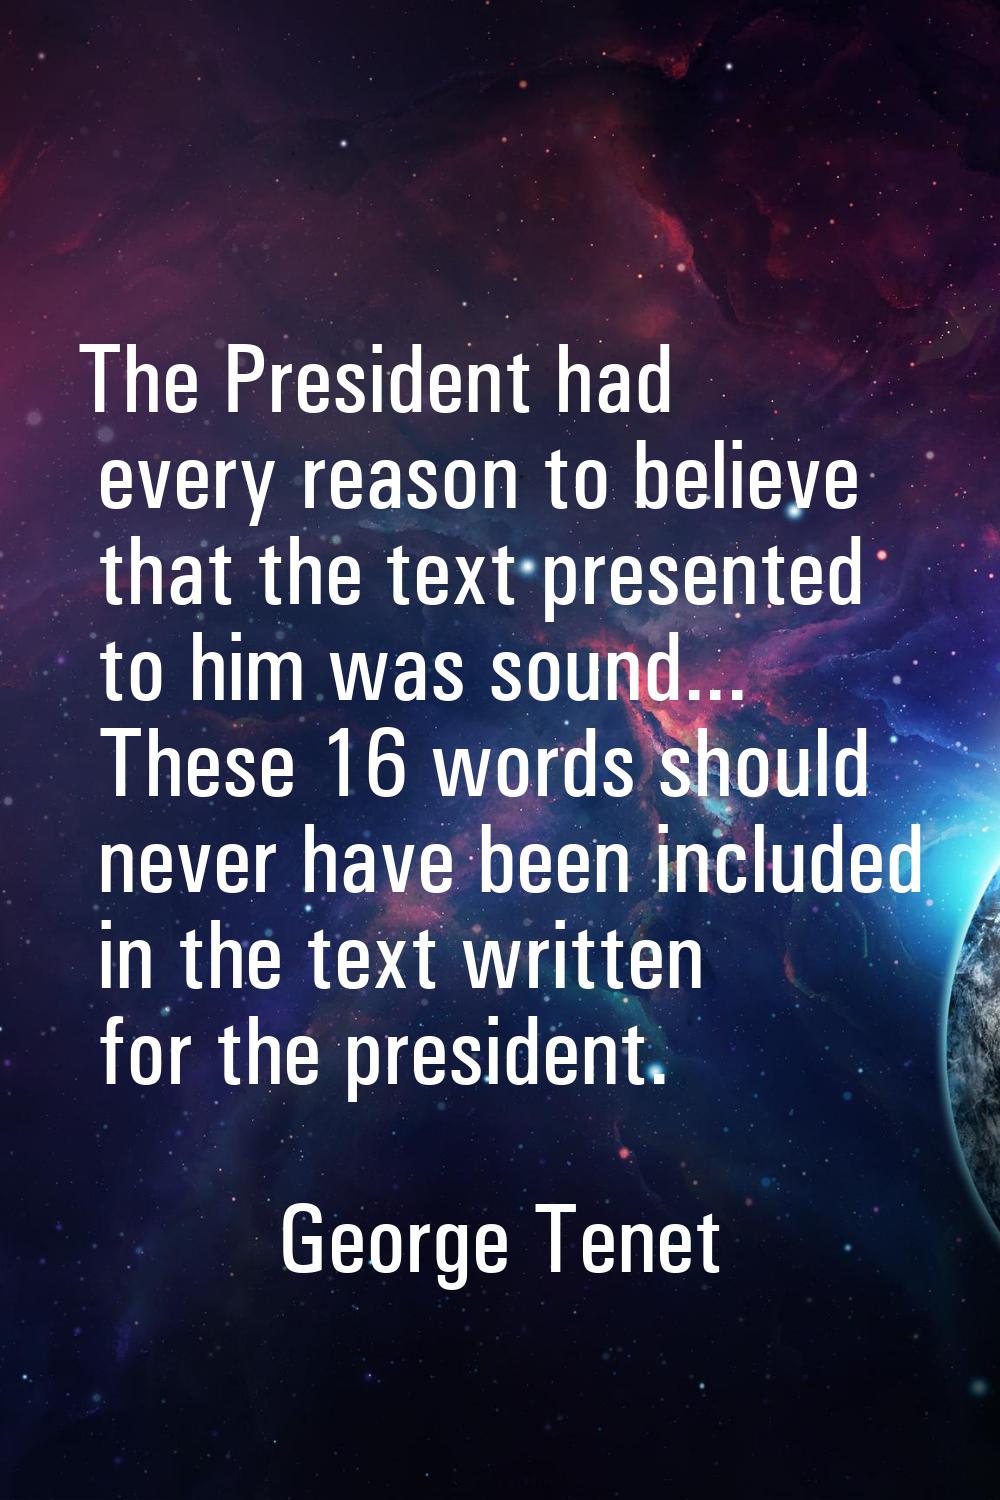 The President had every reason to believe that the text presented to him was sound... These 16 word